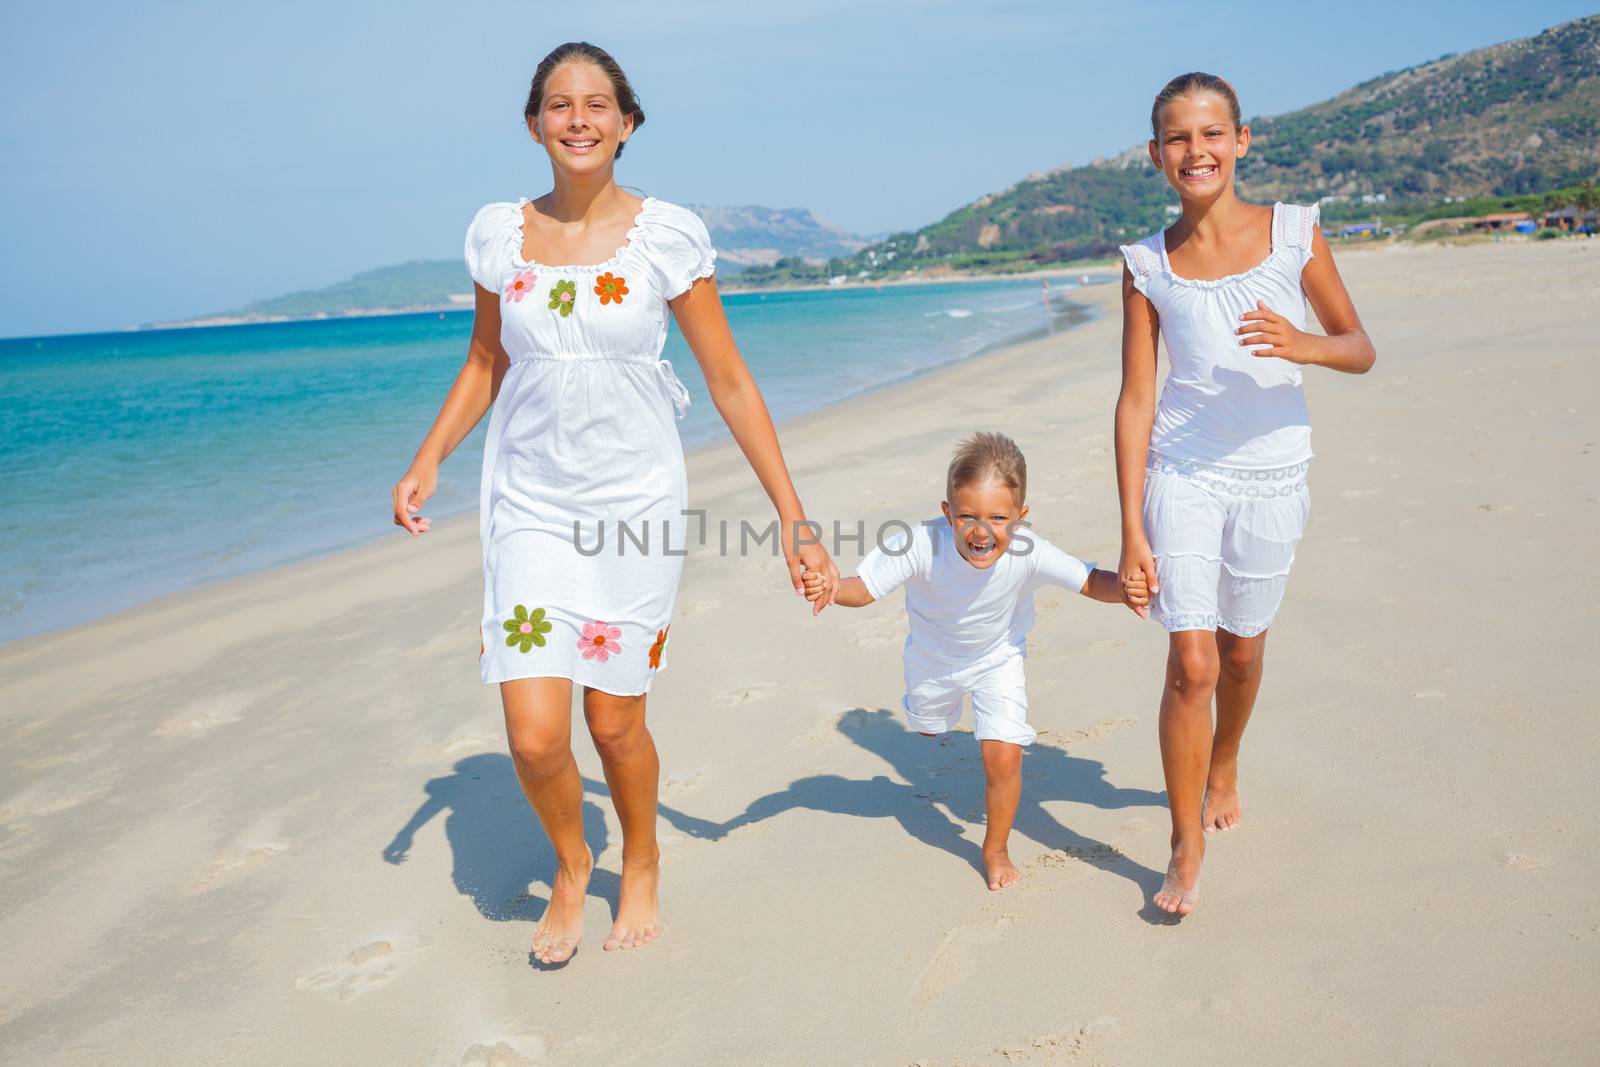 Adorable happy boy and girls running on beach vacation